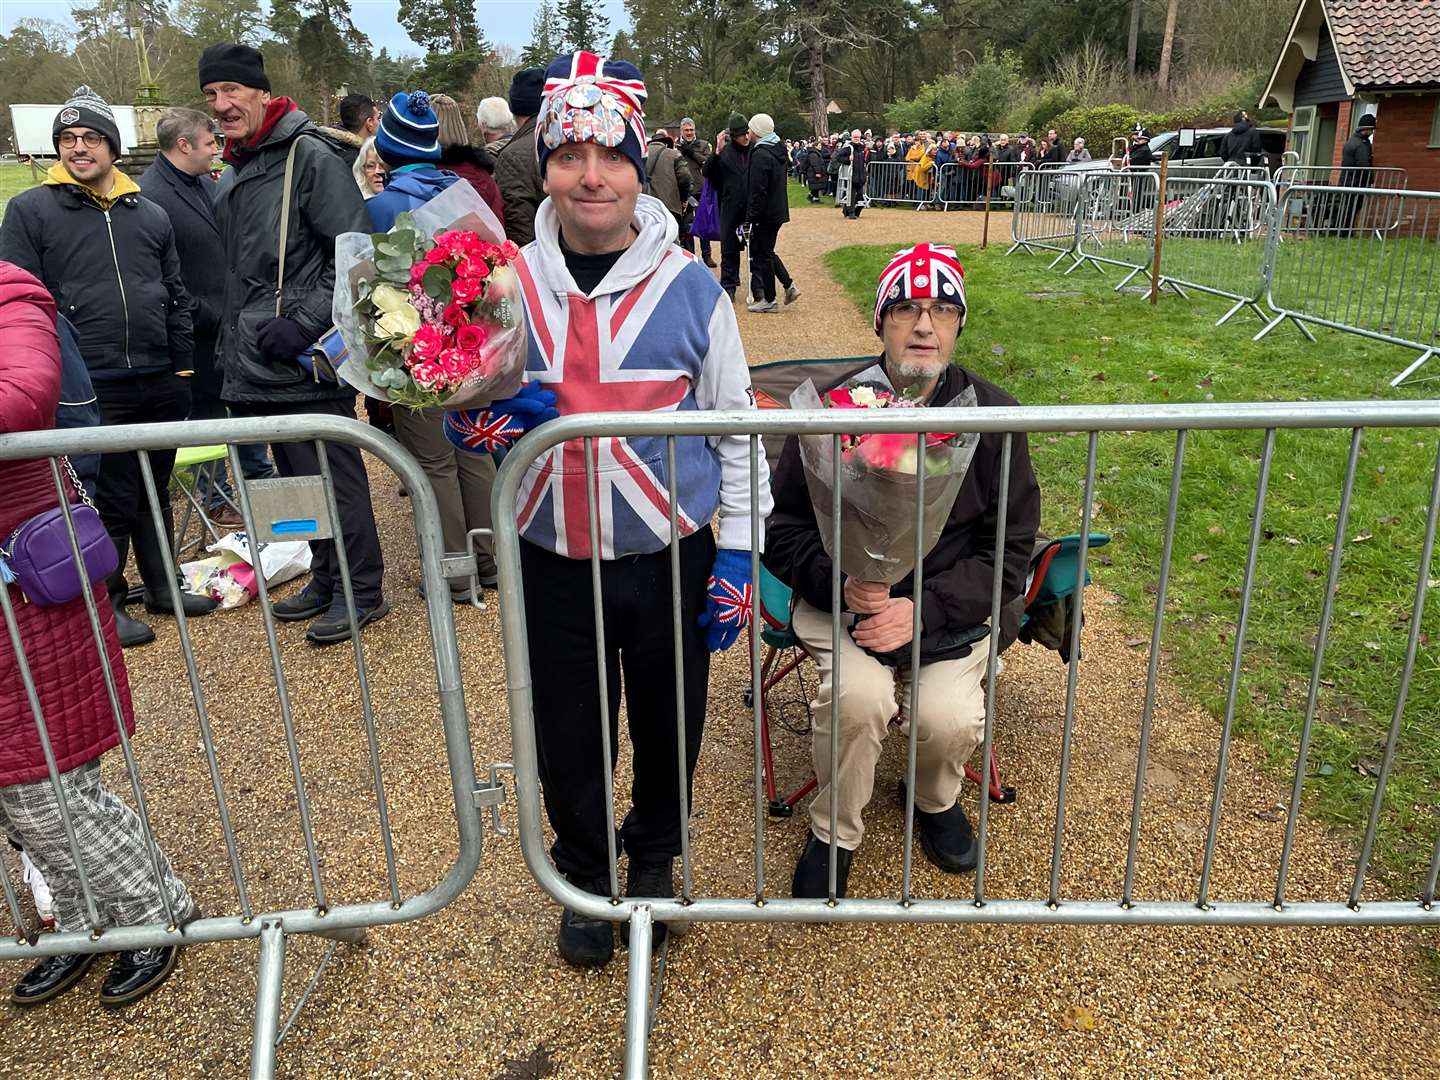 Royal fan John Loughrey (left) and his friend Sky London at the front of the queue at Sandringham ahead of the service (Sam Russell/PA)